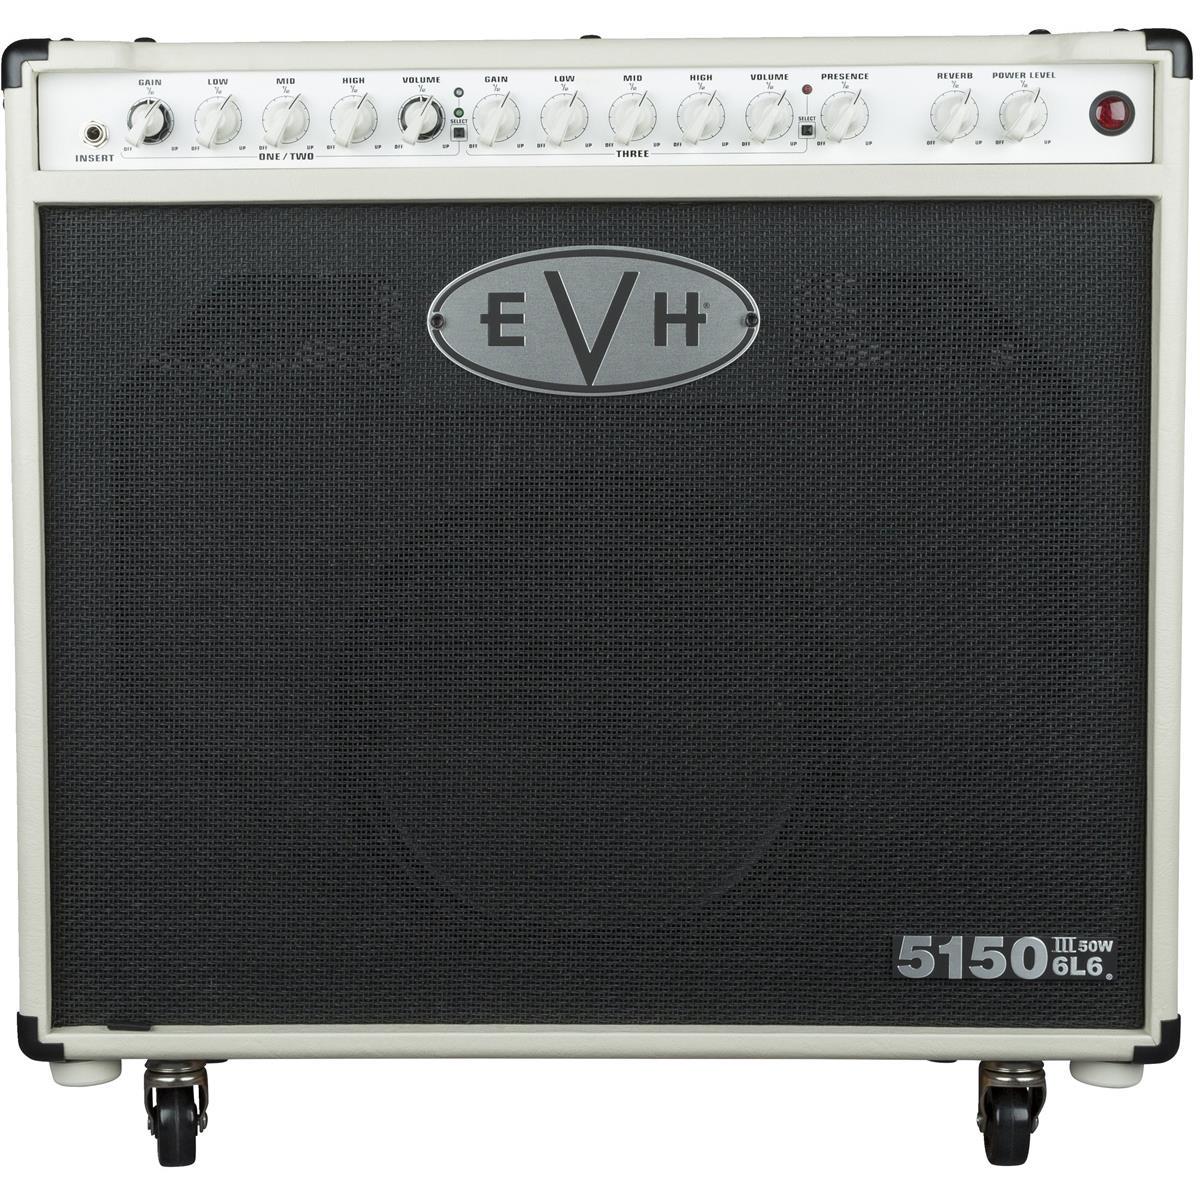 EVH 5150III 50W Amplifier with 6L6 112 Power Tube and 12" Speaker, Ivory Brimming with brawny tone, the EVH 5150III 50W 6L6 112 Combo is arena-sized sound in a Celestion powered compact package for more convenient transport. Redesigned with versatile, all-new independent dual- concentric controls that allow for gain and volume level matching, this 50-watt tube combo amp boasts three channels for any playing style- crisp cleans, raw crunch or searing leads.  Delivering a full-spectrum of tone, channel one features pristine cleans, channel two kicks in with overdrive and heavy gain similar to the EVH 5150III 100S, while channel three oozes with liquid distortion. Channels one and two each have dual concentric gain/volume controls, with shared EQ (low, mid, high). Channel three has its own gain, volume and EQ (low, mid, high) controls. All three channels also have global presence, resonance and reverb controls. Loaded with a 12" custom special designed EVH Celestion speaker to enhance and refine both your sound and your style, this combo amp also has seven JJ ECC83 (12AX7) preamp tubes, two JJ 6L6 power tubes and front-panel adjustable power output from 50 watts down to one watt.  Other features include a single input, rear-panel selectable output impedance (4, 8 or 16 ohms) with a pair of parallel speaker outputs, rear-panel MIDI input and preamp output, rear-panel effects loop and headphone jack (mutes power amp) and a four-button footswitch that controls all three channels and reverb for easy onstage switching. The cabinet is constructed out of birch with special internal baffling for tight and increased bass response. Wrapped in stylish Black or Ivory vinyl, this combo is finished off with vintage-style chicken-knobs, red LED jewel indicator, molded black plastic top handle and pop- out casters. A high-quality fitted cover is available as an EVH Accessory.